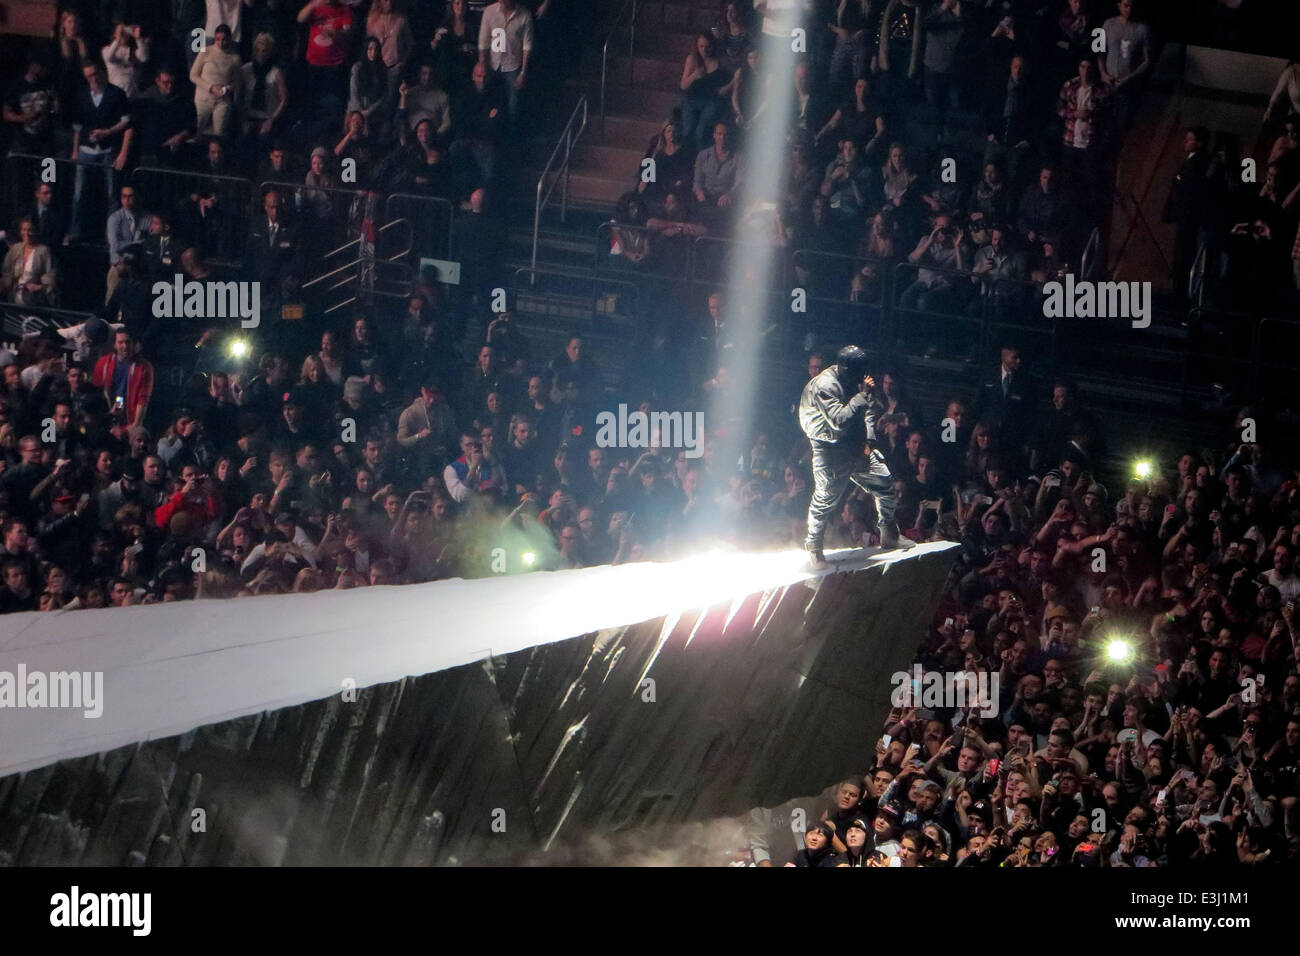 Kanye West Performs To A Sold Out Crowd At Madison Square Garden